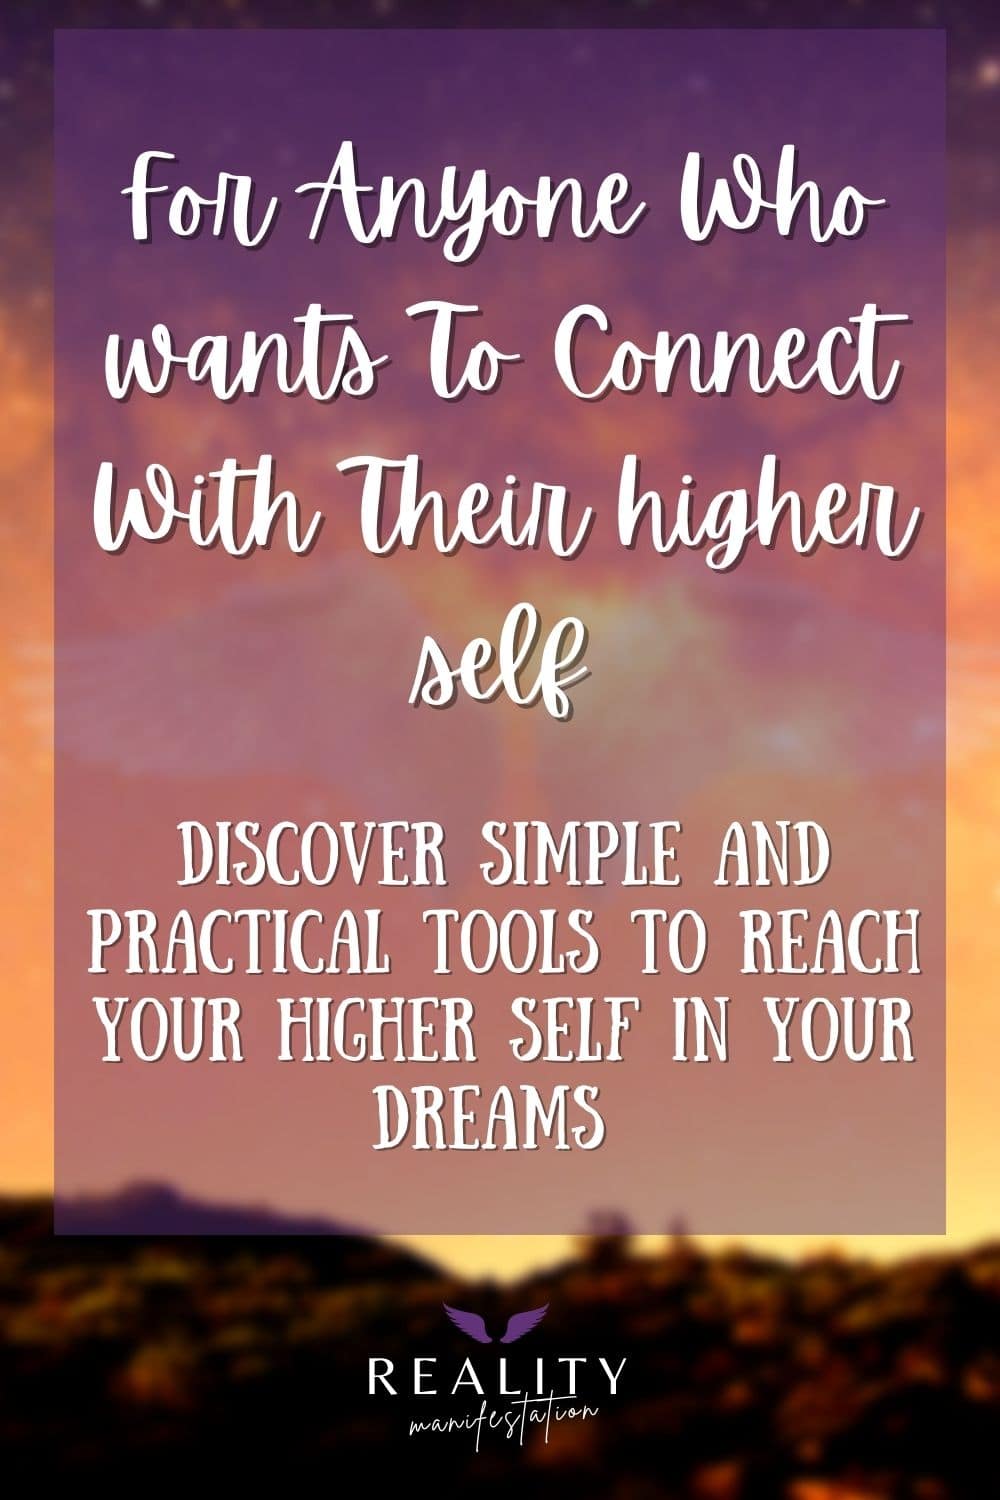 Background image of field with star filled sky with a purple box above it with text saying For Anyone Who wants To Connect With Their higher self discover simple and practical tools to reach your higher self in your dreams